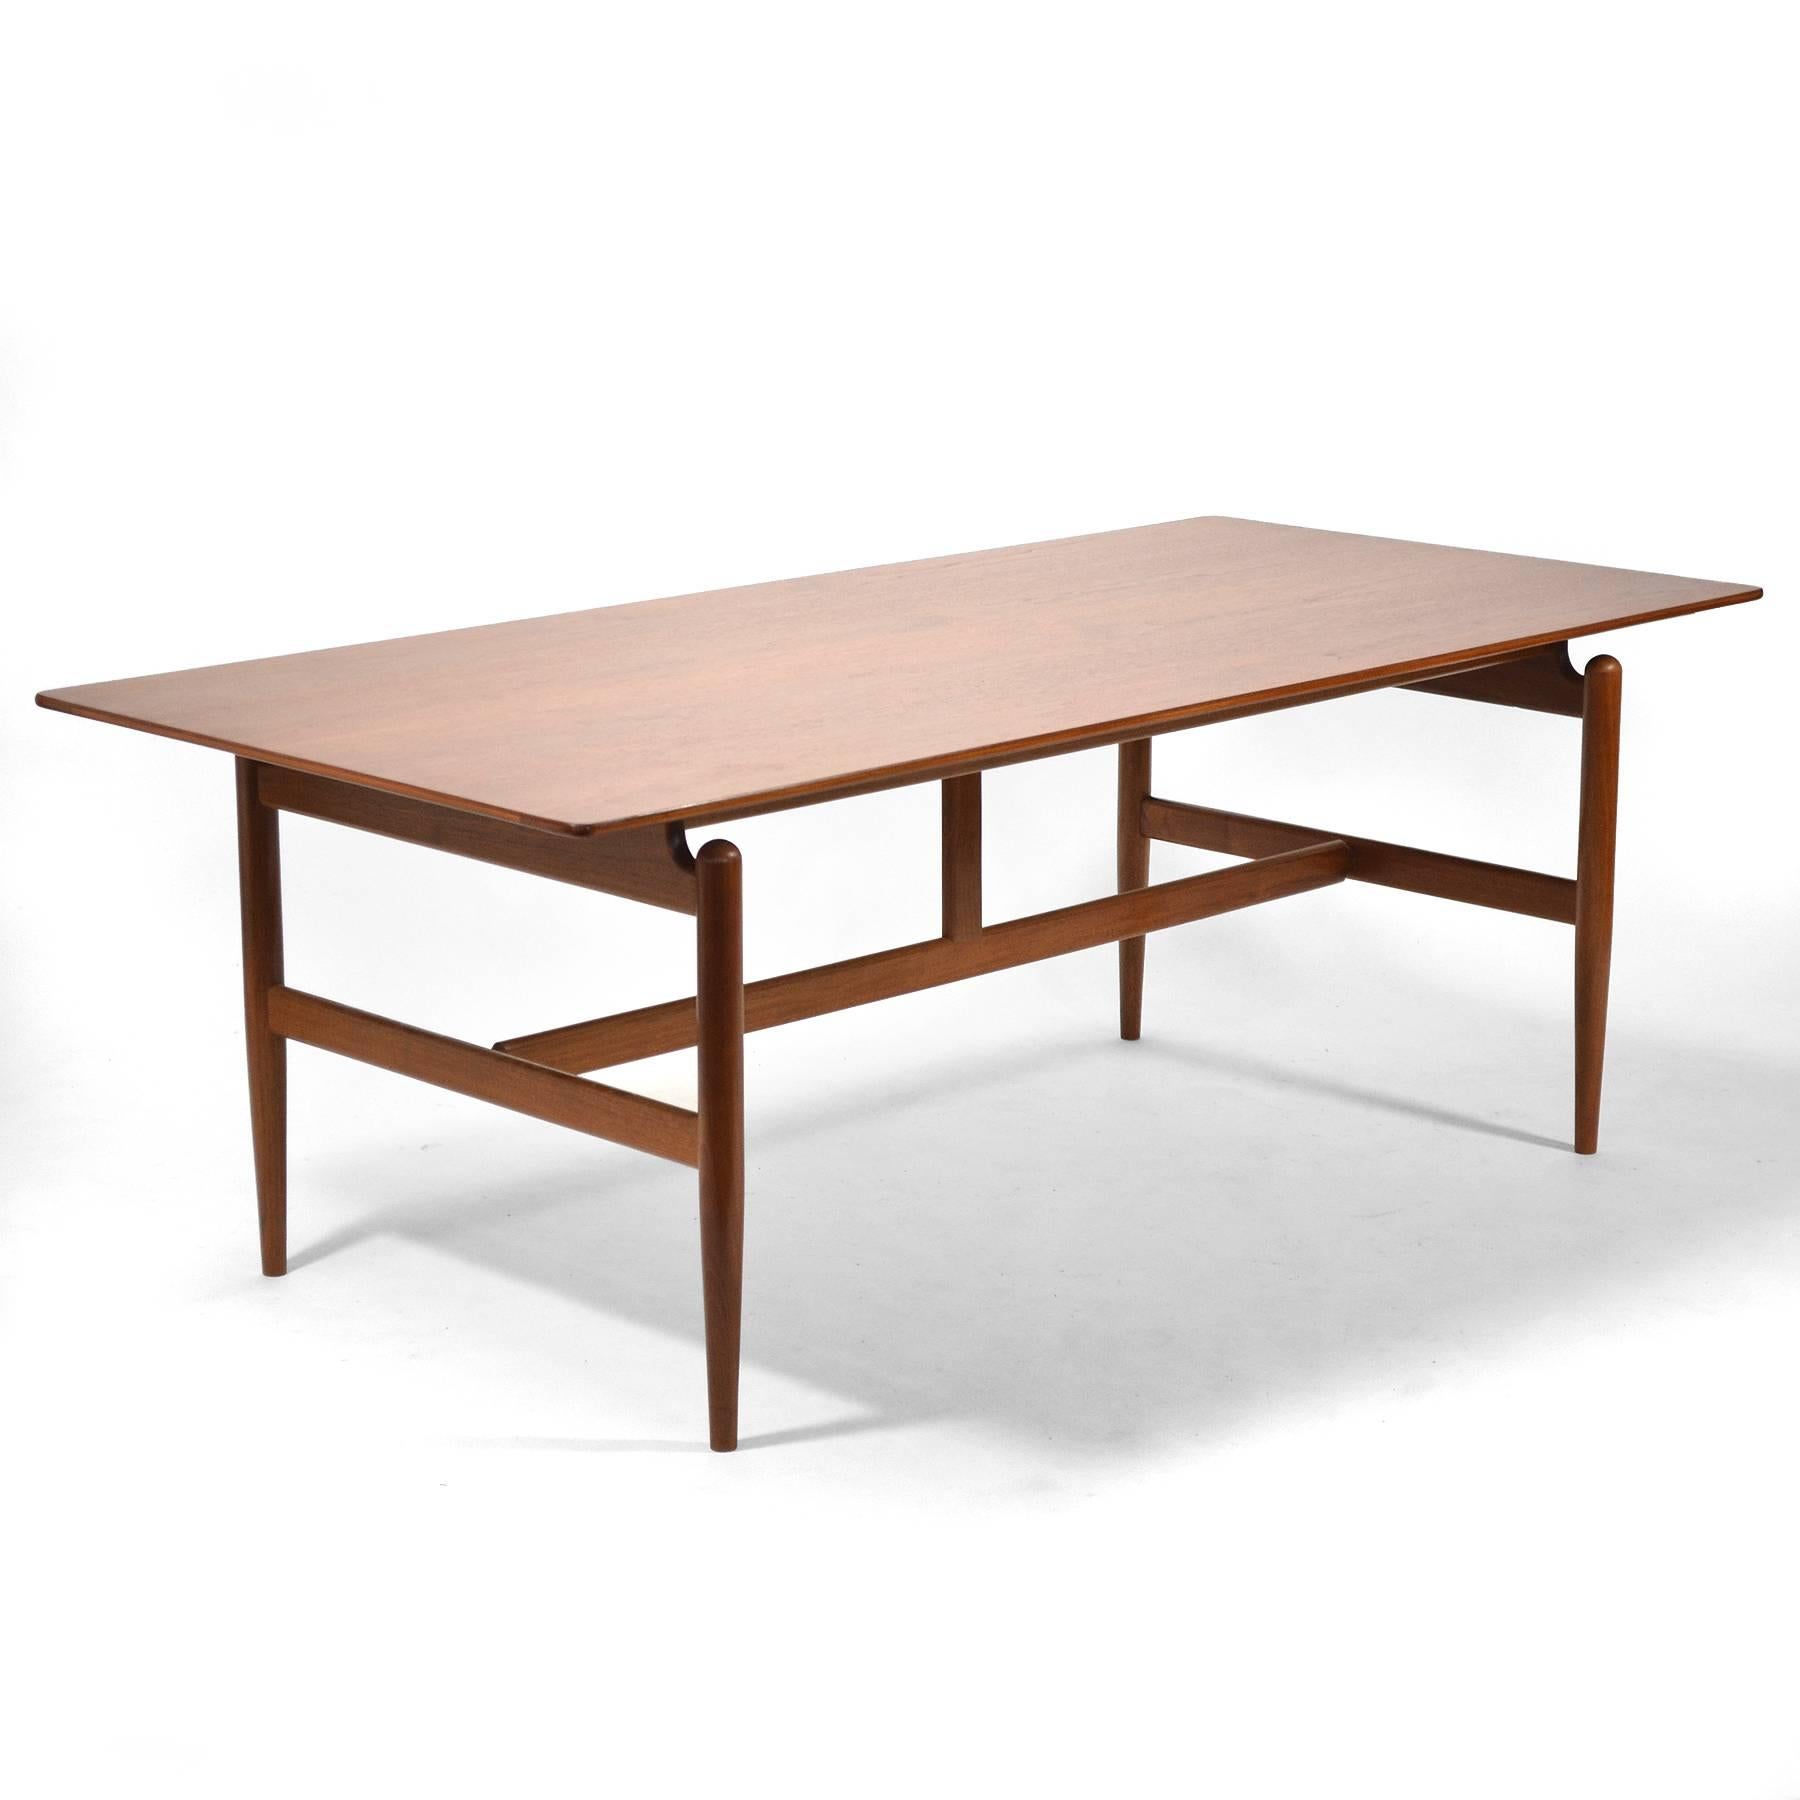 Finn Juhl designed this beautiful desk or work table for his own home before licensing it to Baker Furniture who offered it as model no. 520. Also known as the Kaufmann table, the substantial table with a floating top can also be used for dining.
  